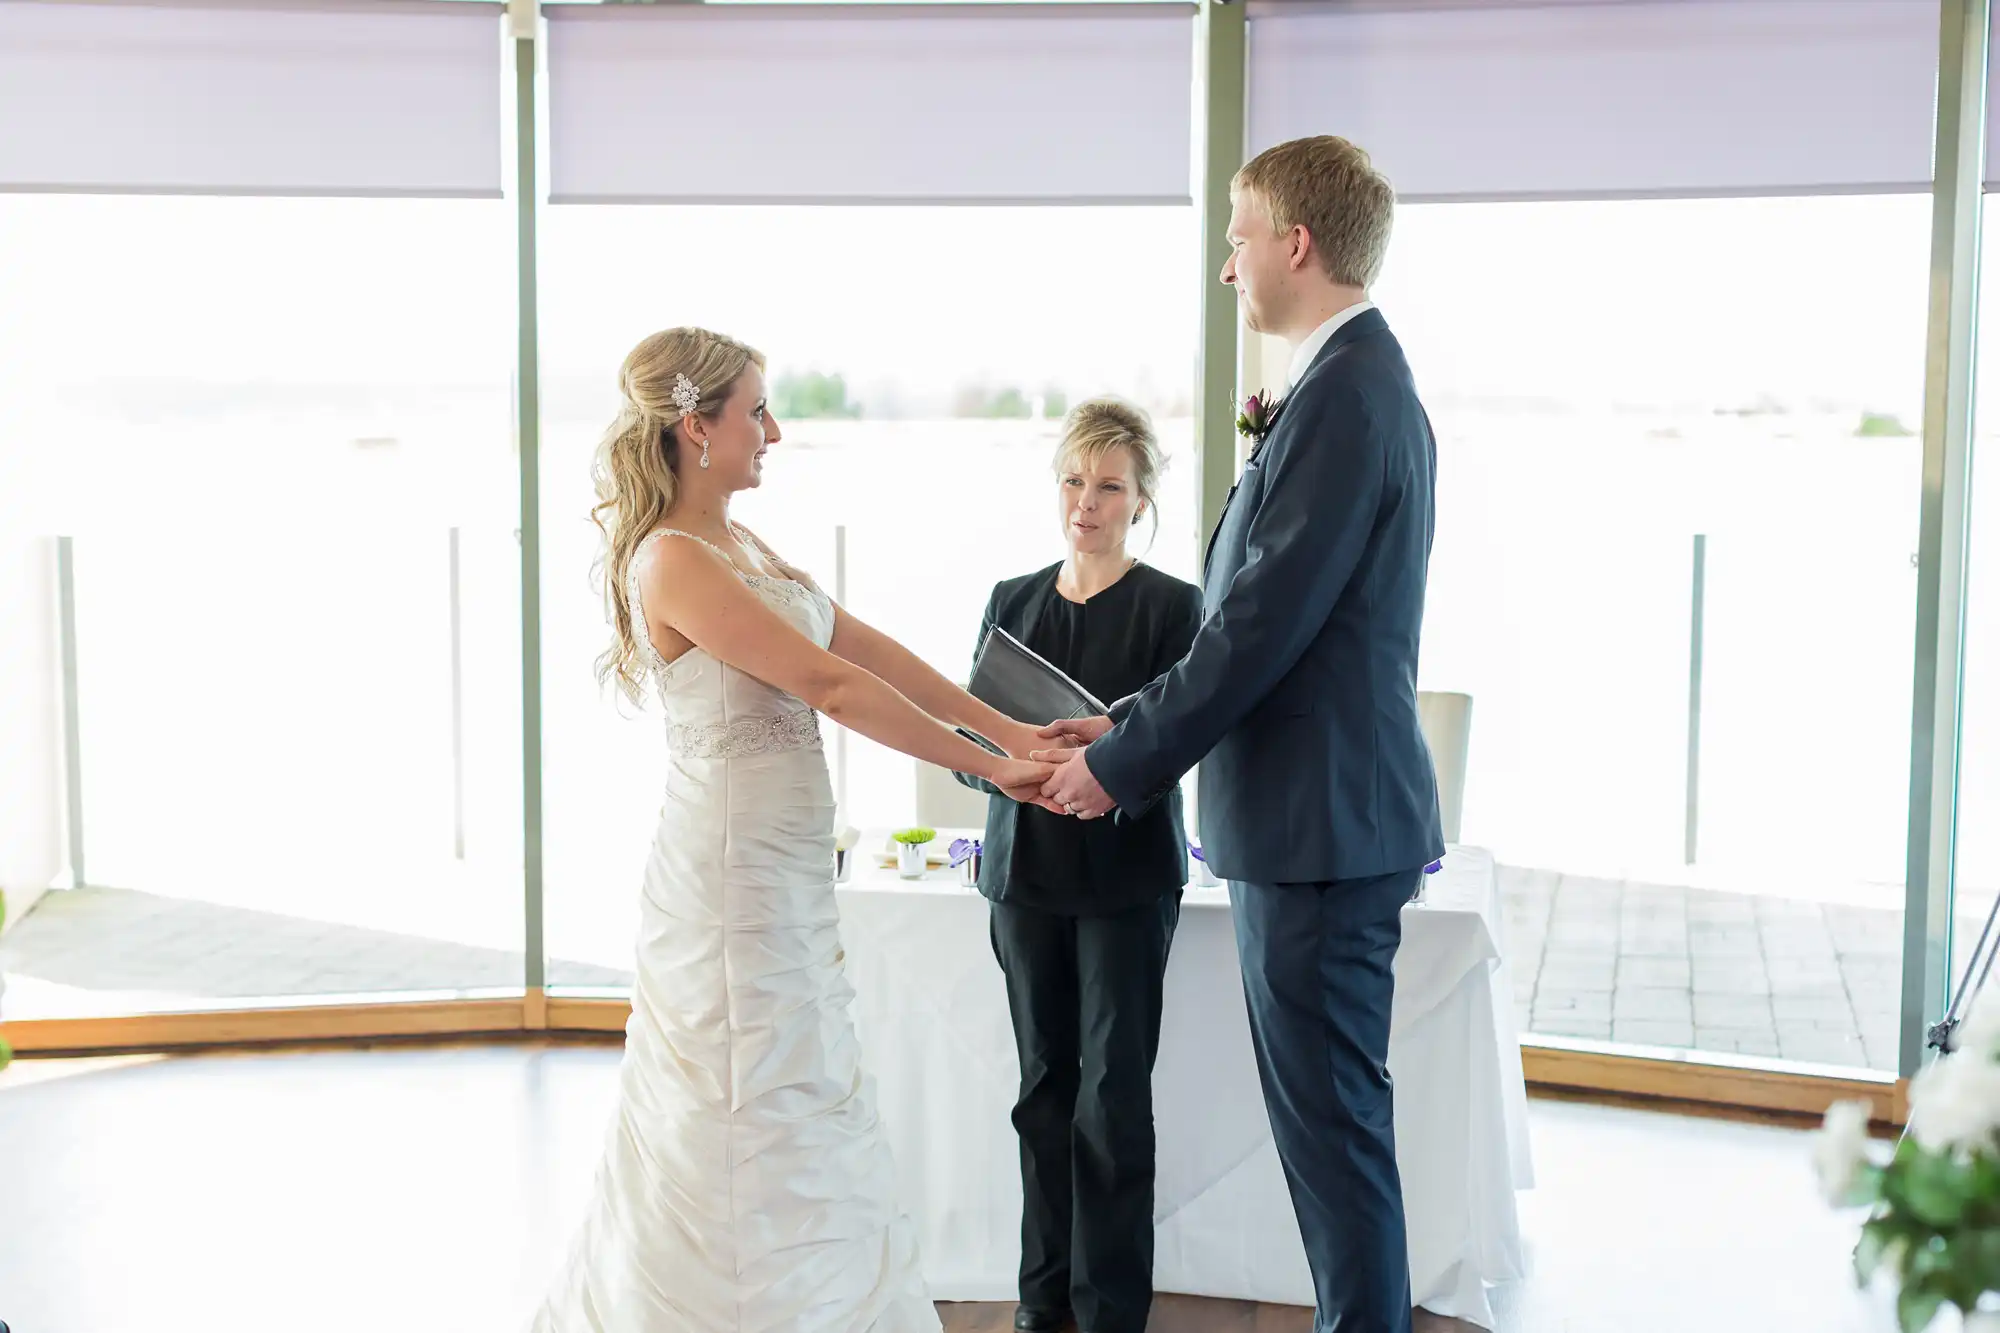 Bride and groom holding hands during wedding ceremony, with an officiant standing between them, inside a bright venue with large windows.